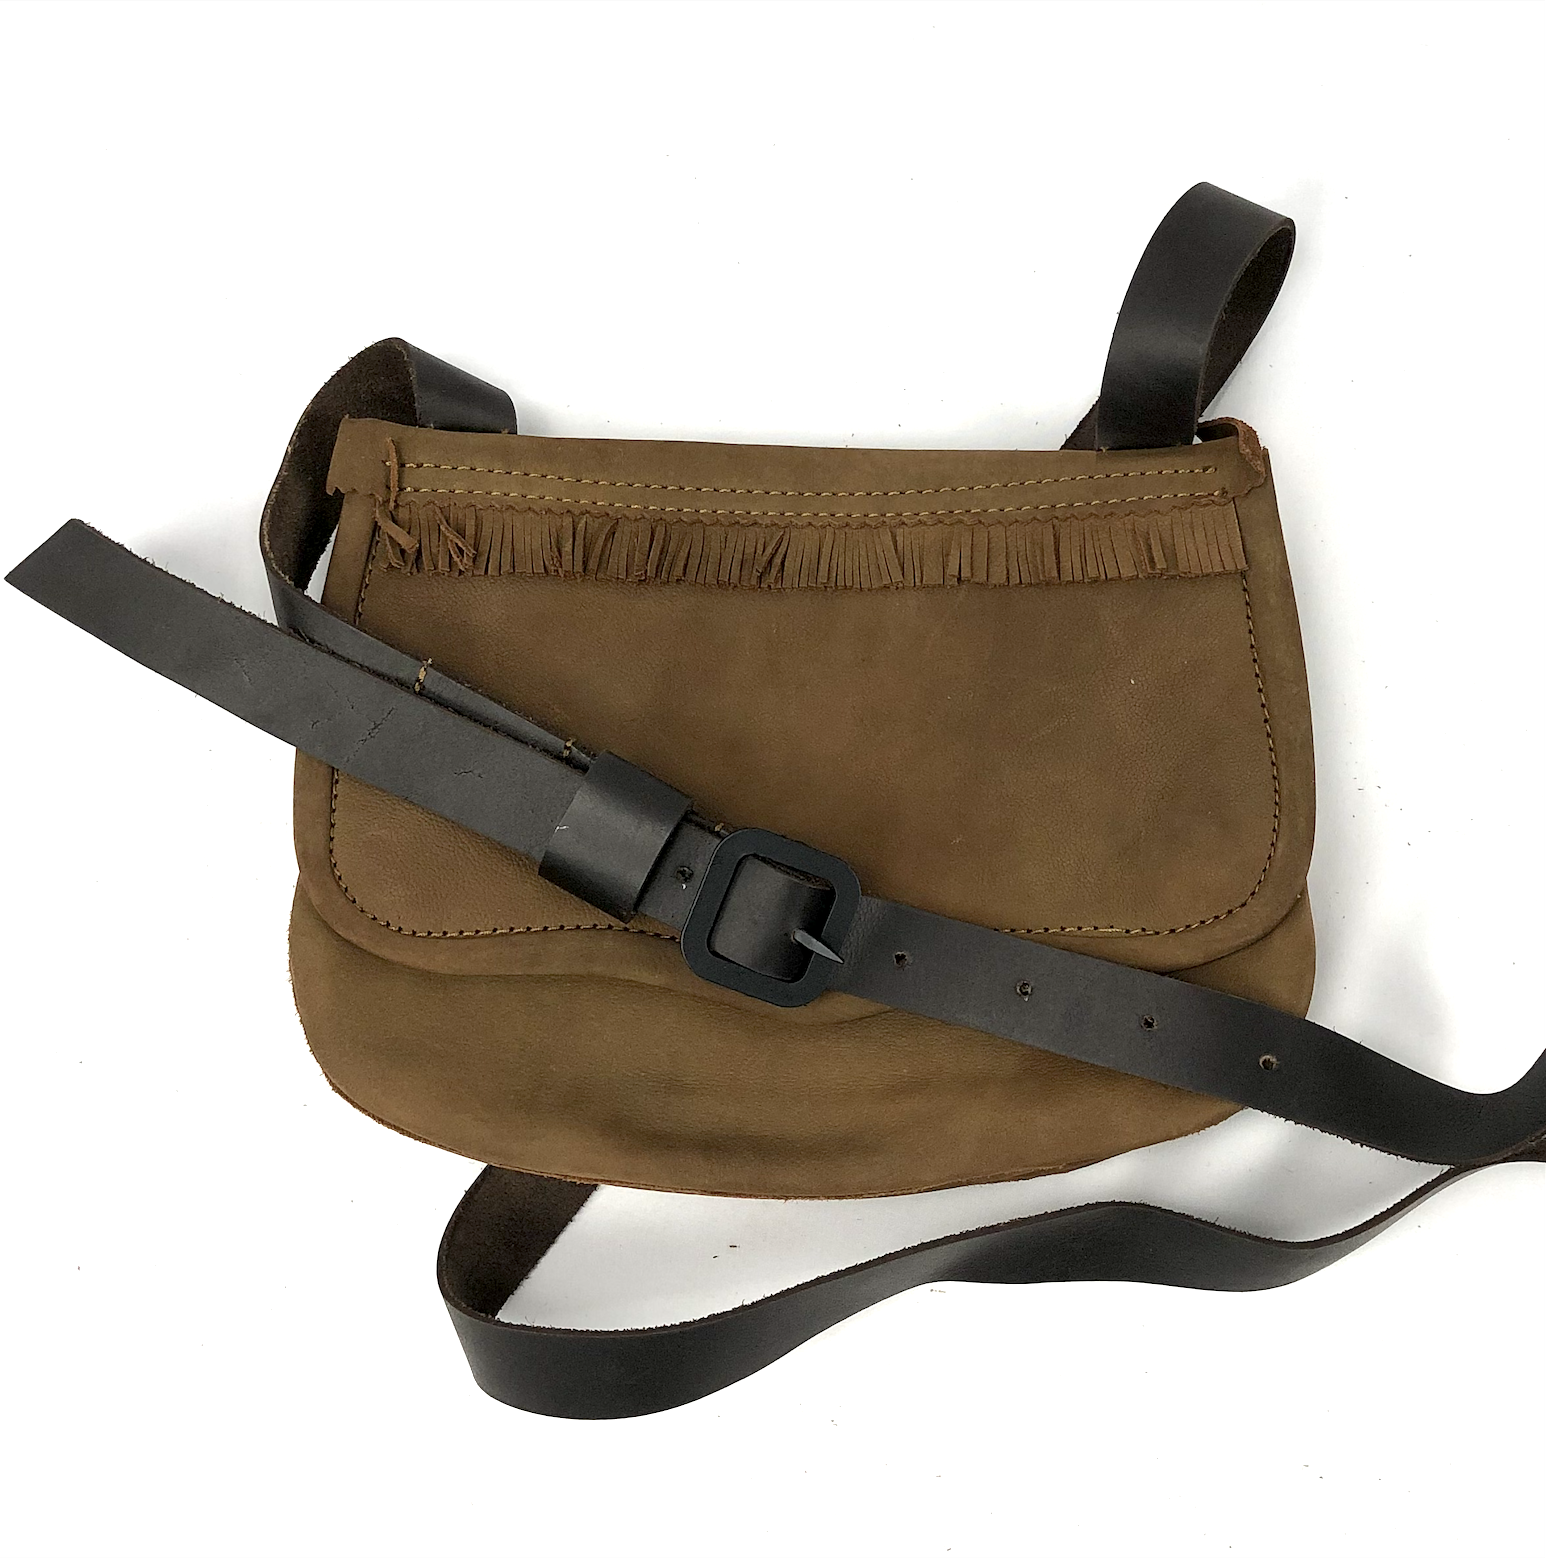 Double Bag Hunting Pouch / Possibles Bag